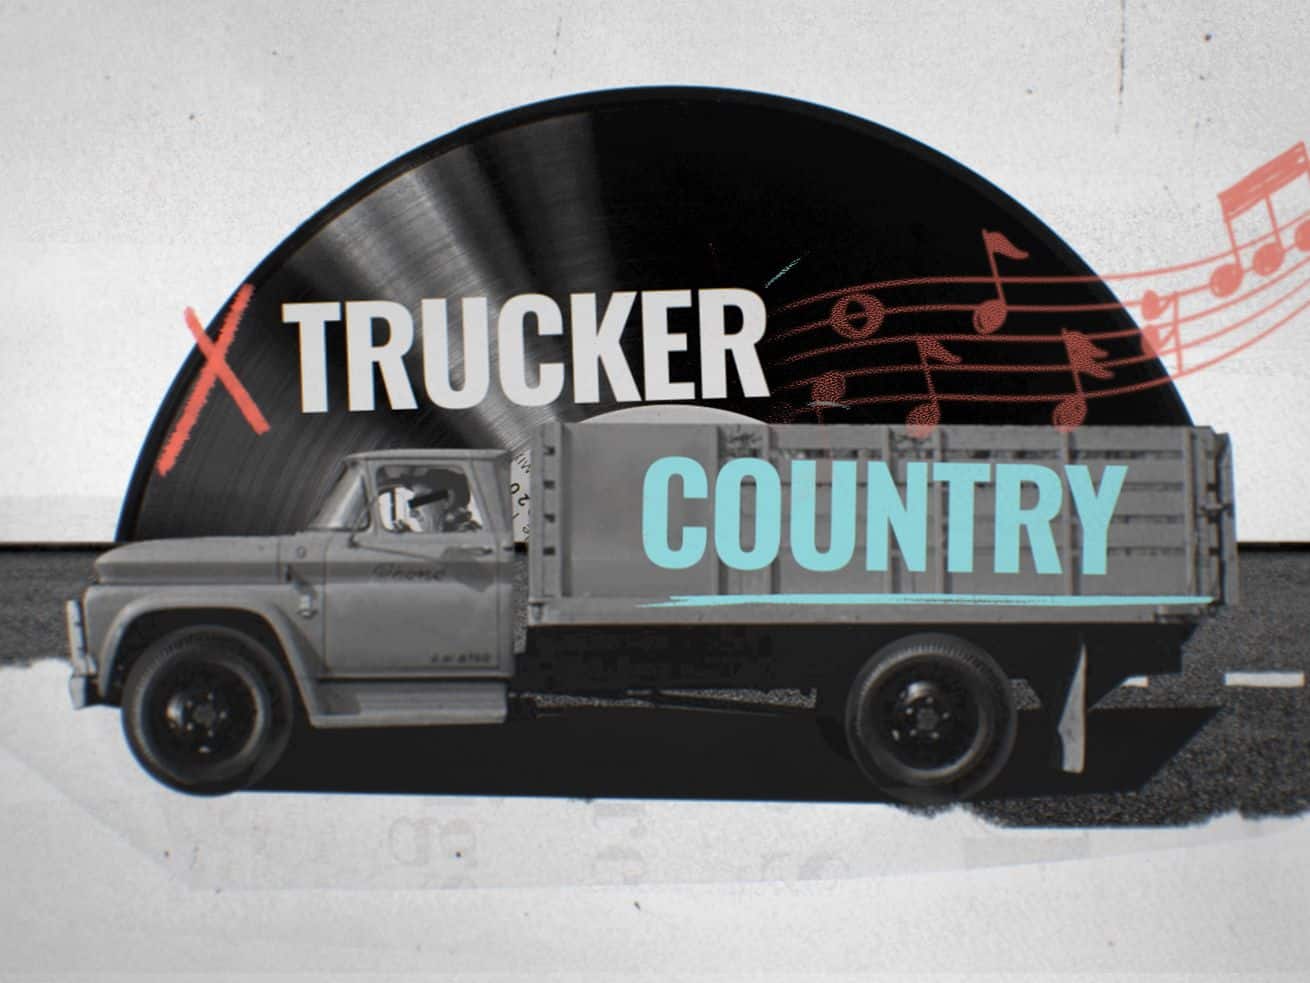 How trucker country music became a ’70s fad